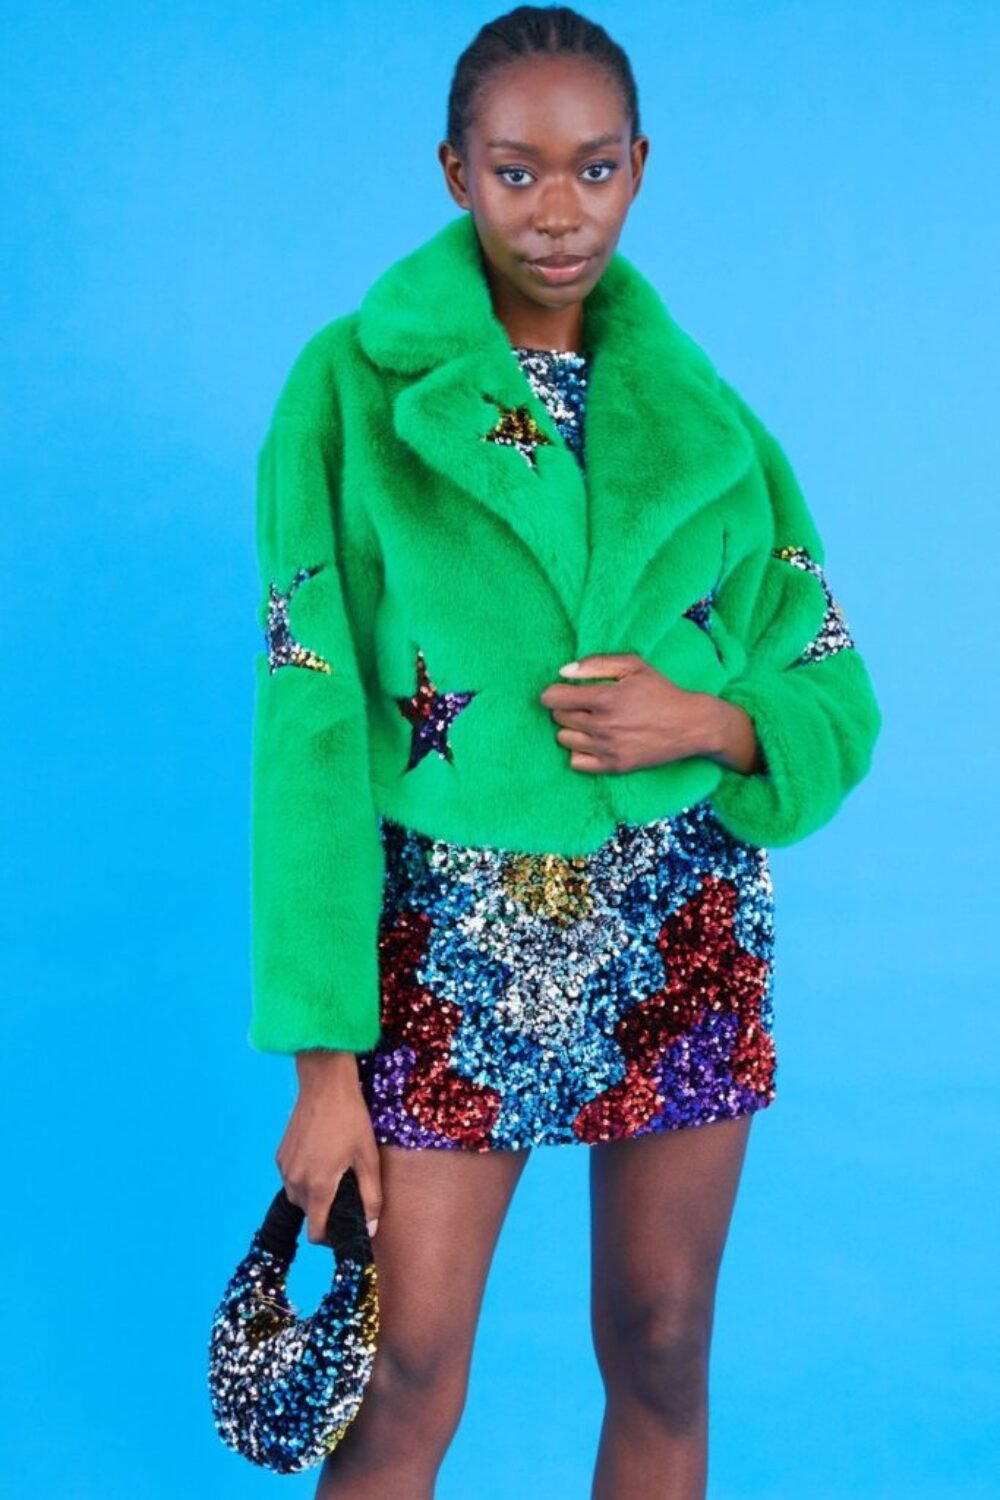 Shop Lux Green Bamboo Faux Fur Sequins Star Jacket and women's luxury and designer clothes at www.lux-apparel.co.uk